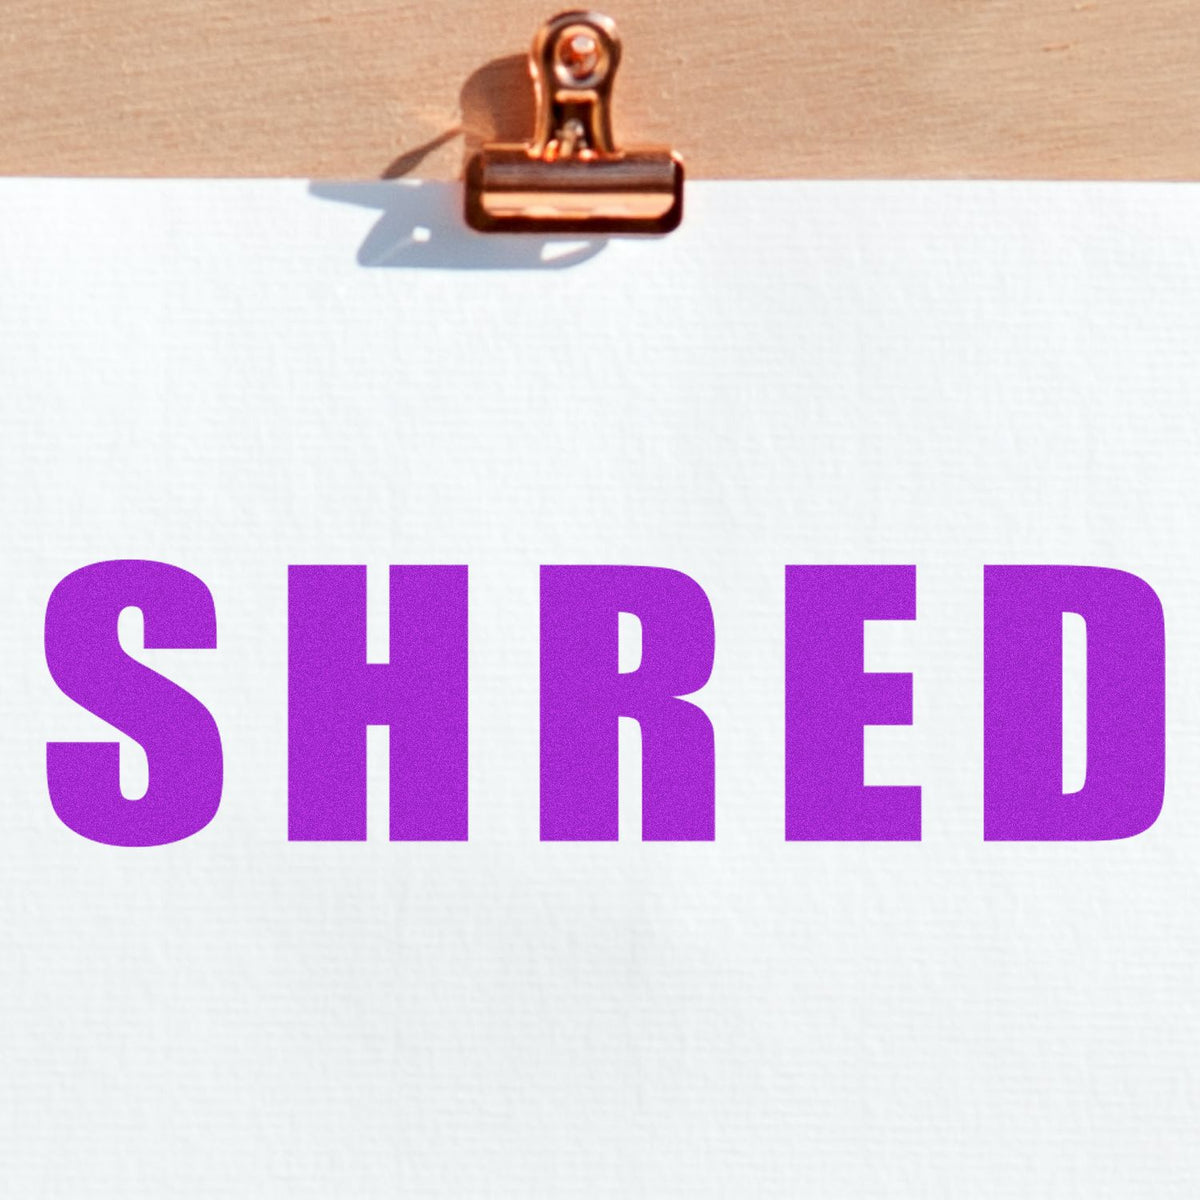 Large Bold Shred Rubber Stamp In Use